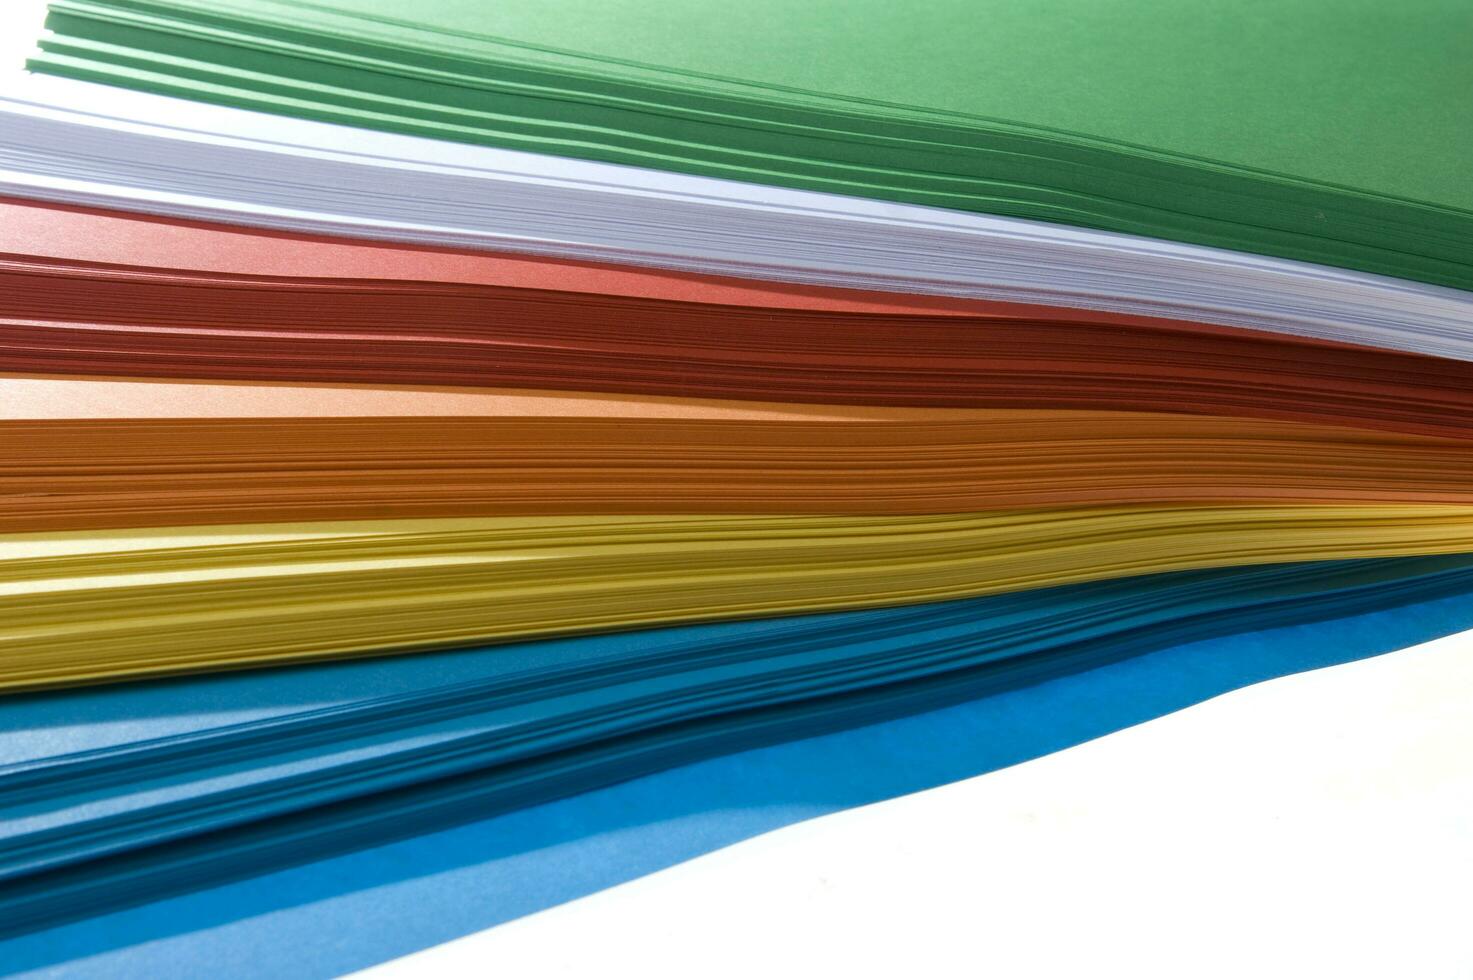 a stack of colored paper with a white background photo